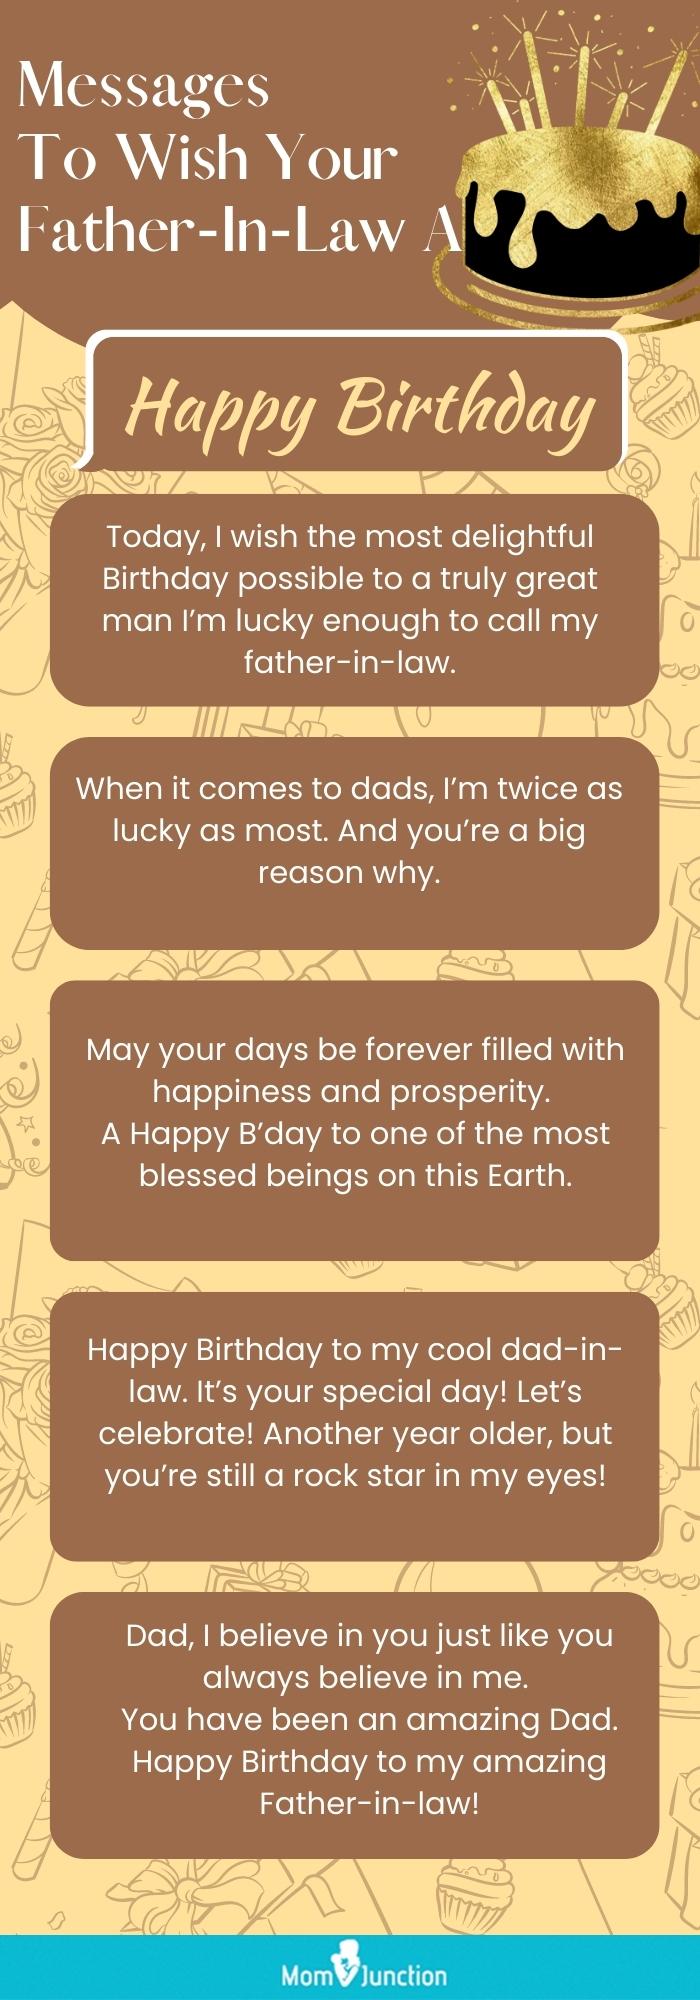 200+ Best Happy Birthday Wishes For Father-In-Law